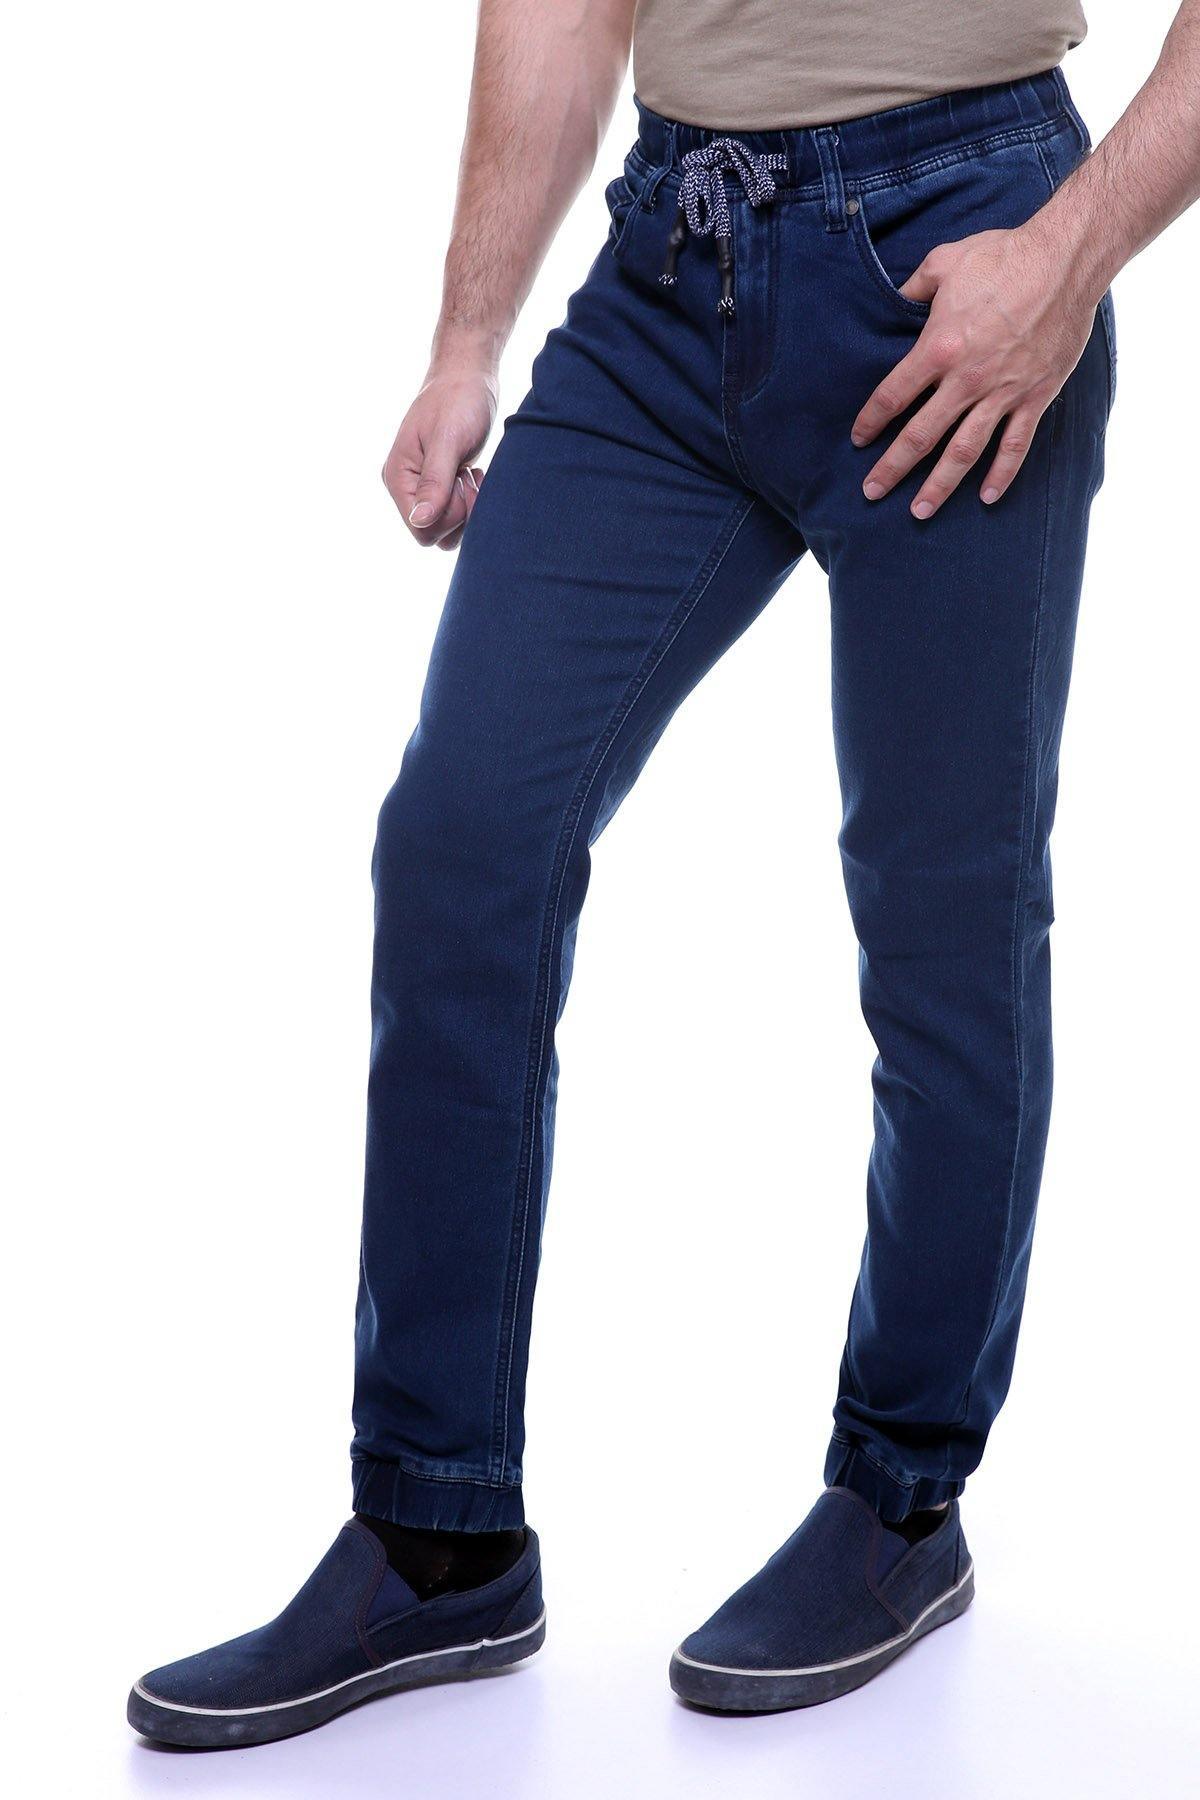 Jeans Trouser 5 Pocket Dark Blue at Charcoal Clothing